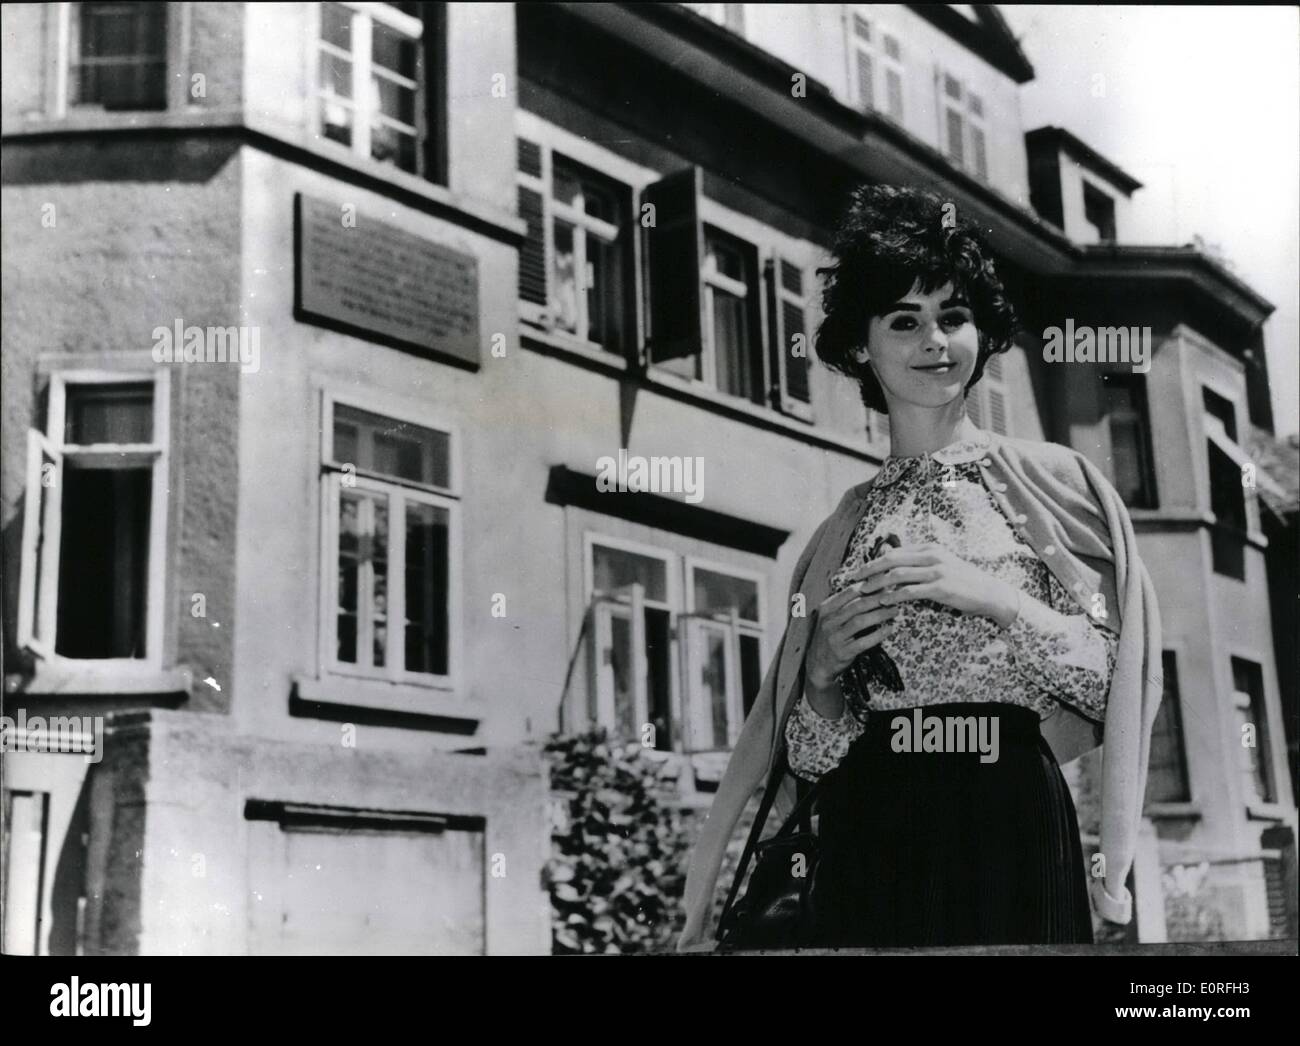 May 05, 1959 - Star of ''The Diary of Anne Frank'' film visits Anne's birth place. The young American actress Millie Perkins who played the title role in the film ''The Diary of Anne Frank'' who is on European tour before the world premiere of the film in London next month paid a visit to the house in Gangahfer street, Farnkfurt, Germany, where Anne Frank was born. Photo shows Millie Perkins pictured in front of the Anne Franks birthplace in Frankfurt. Stock Photo